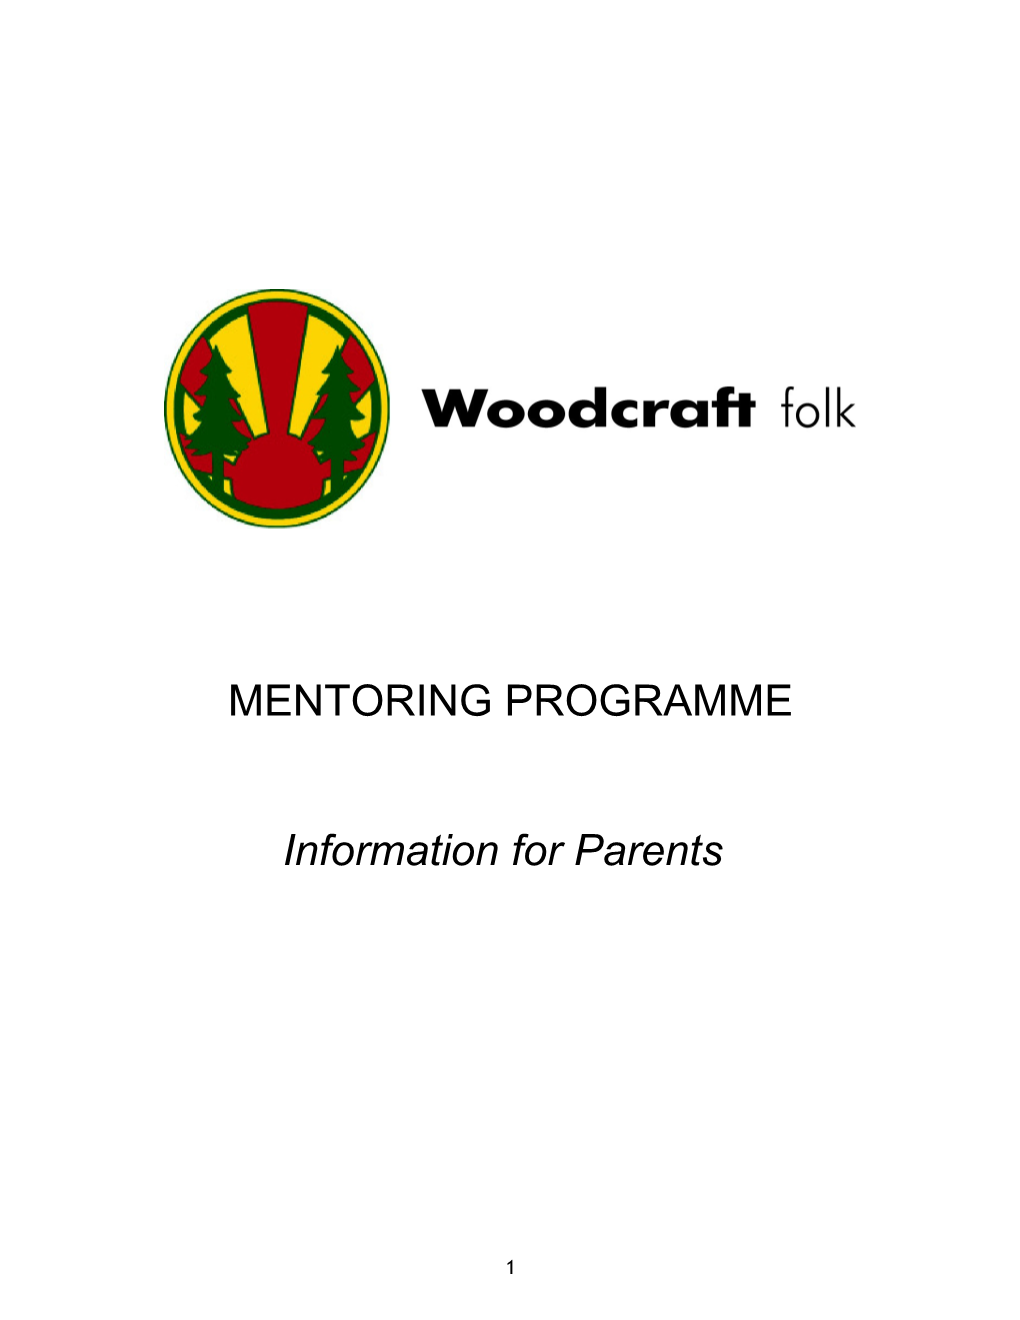 Guide to Mentoring for Parents and Guardians